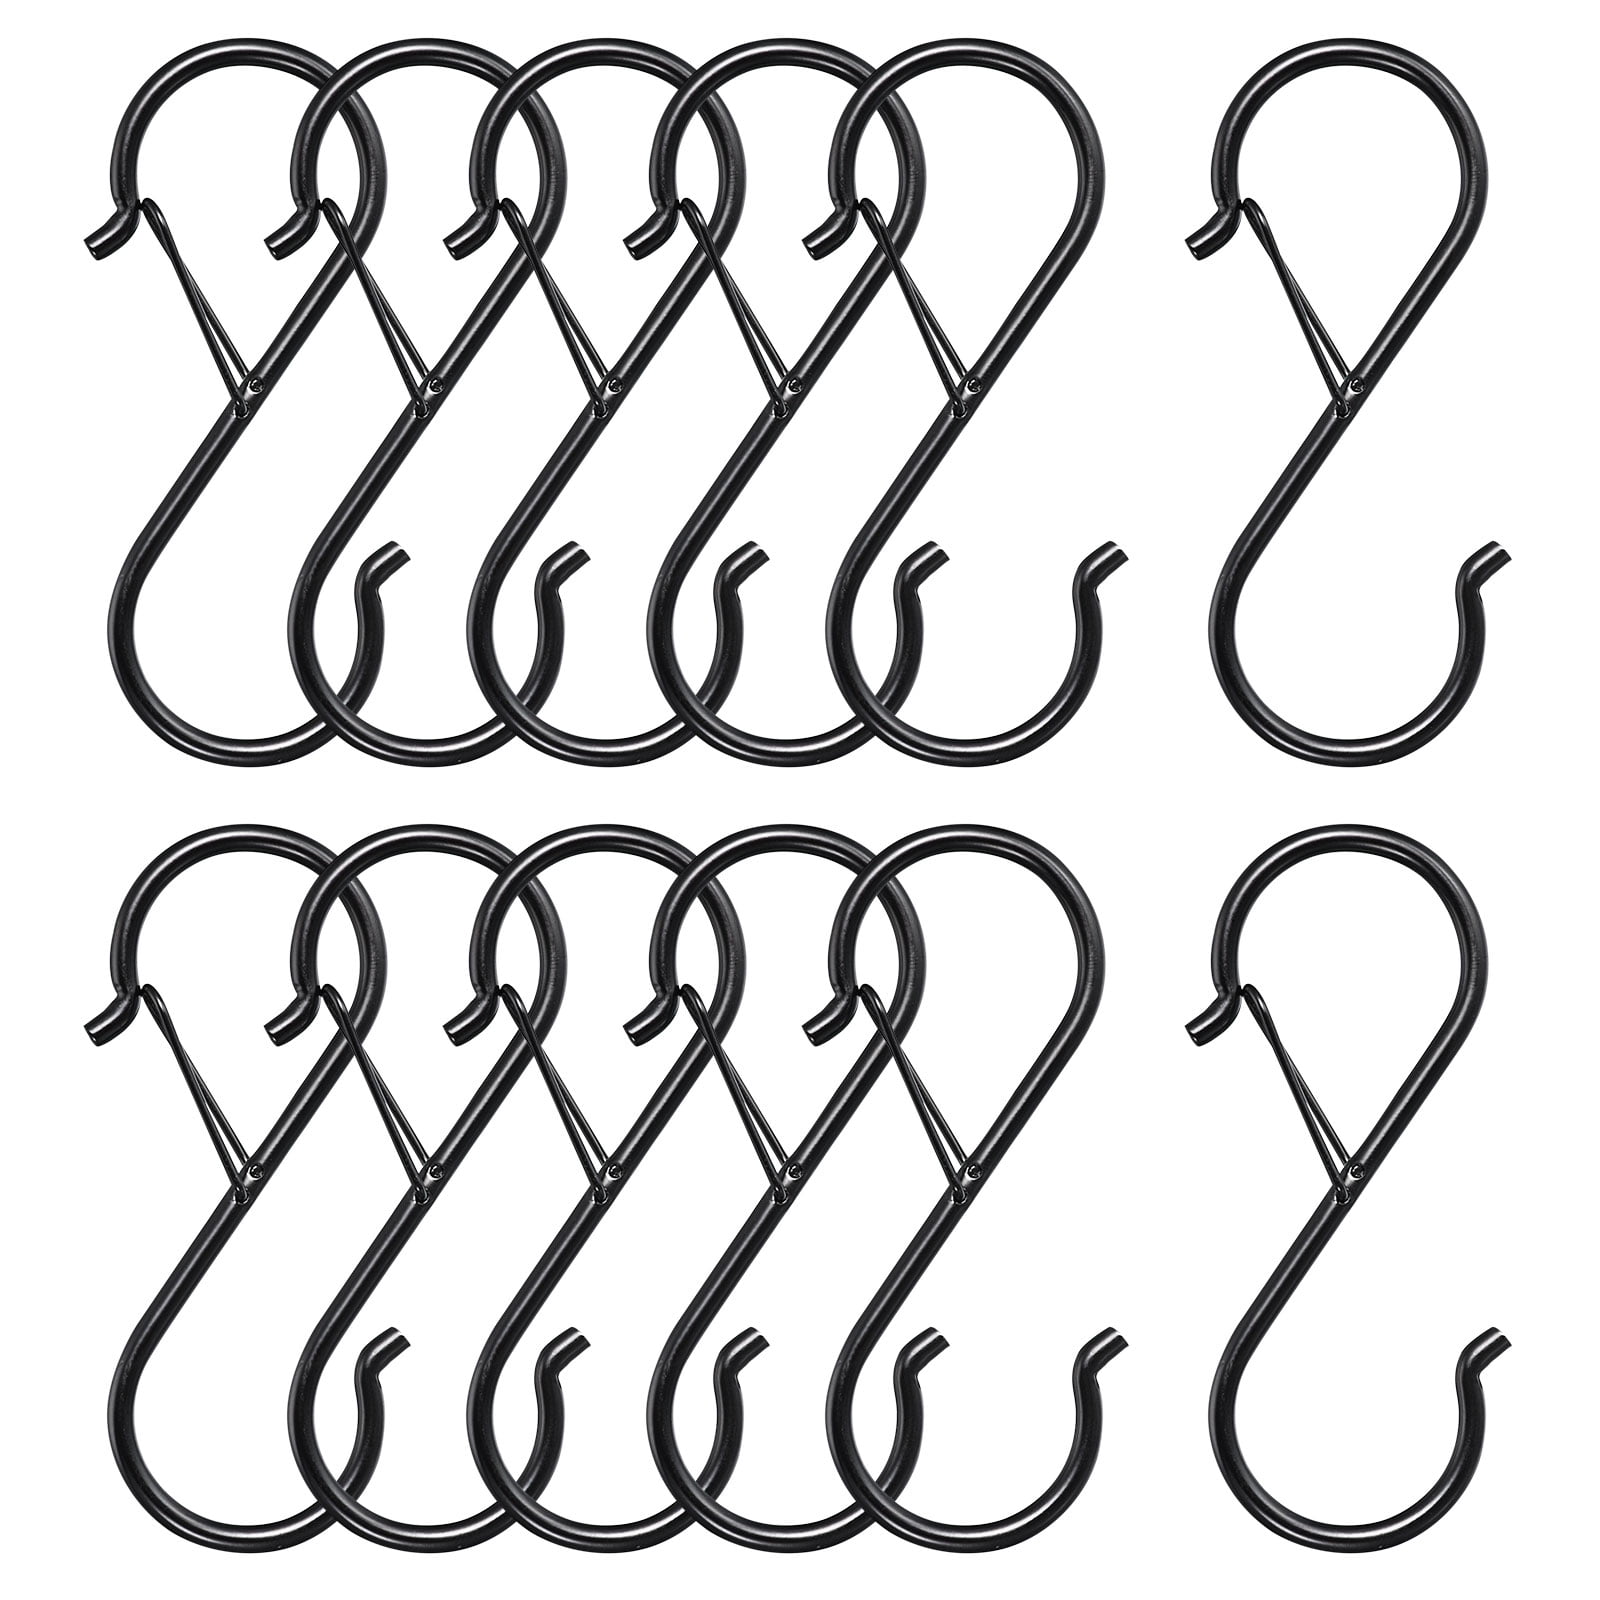 S Hooks for Hanging, 12Pcs 3.5 Inch - Metal S-Shaped Hooks with